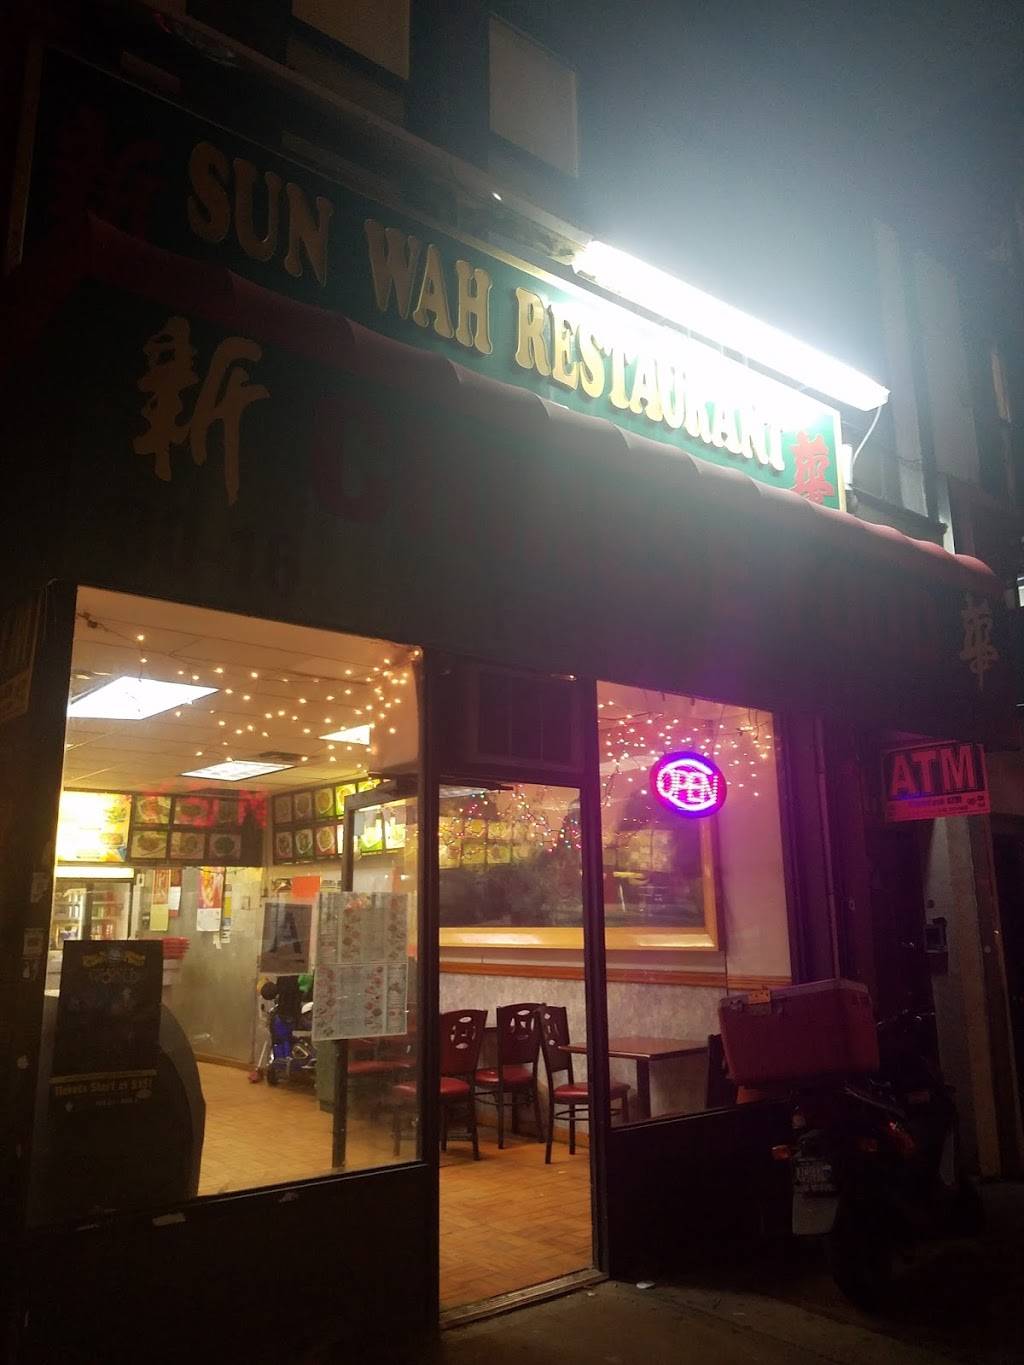 Sun Wah | restaurant | 3016 36th Ave, Queens, NY 11106, USA | 7189375212 OR +1 718-937-5212